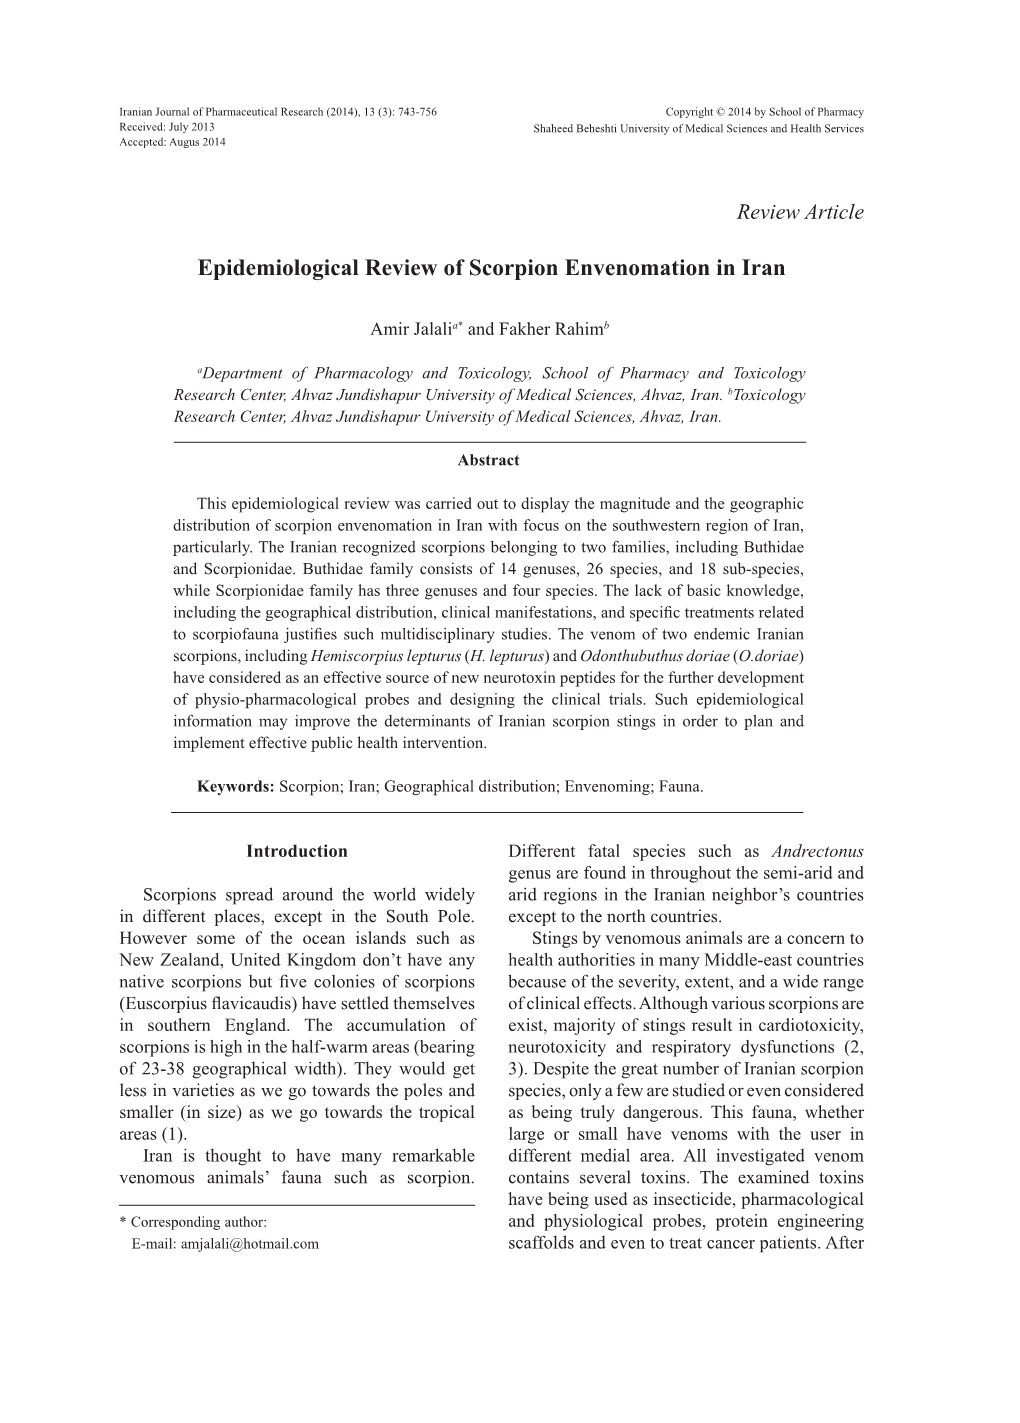 Epidemiological Review of Scorpion Envenomation in Iran